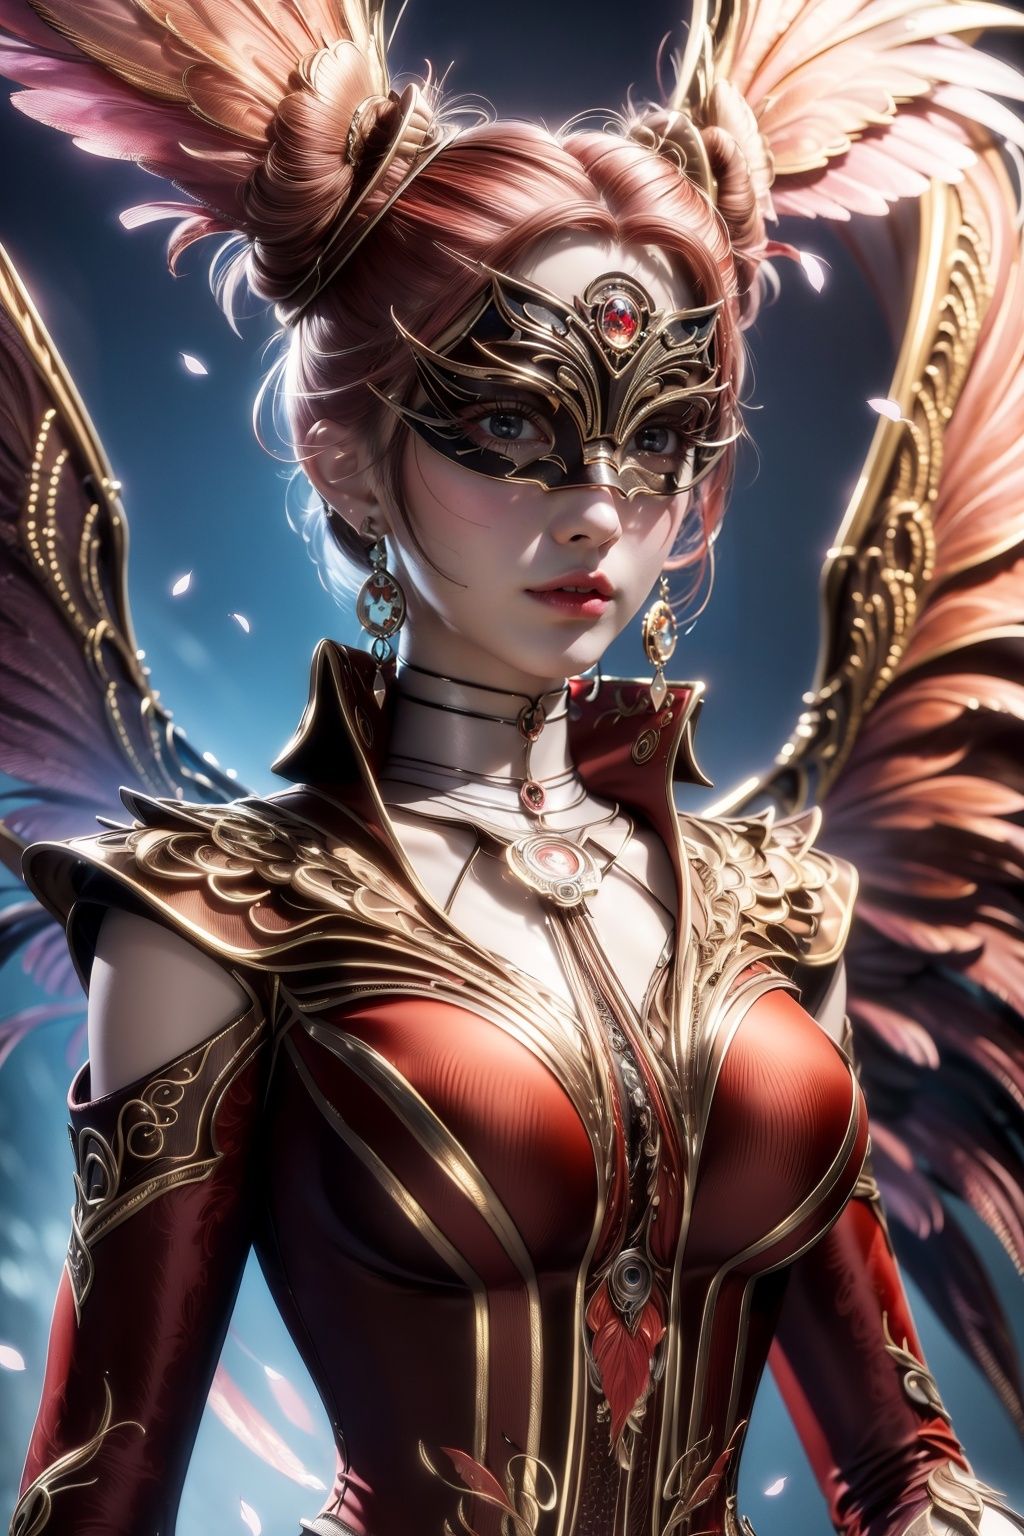 (Hyper Real), (illustration), (high resolution), (8K), (Very detailed), (Best Illustration), (Beautiful detailed eyes), (Best quality), (Super detailed), (Masterpiece), (the wallpaper), (Detailed face), Solo, (Dynamic pose), 1girl,jewelry,wings,dress,crystal,Peacock feathers,1 girl,yuyao,xwhd,(upper body),huliya,dzn-hd,yf-hd,mxt-hd,wings,mxtc-hd,mask,mxtm-hd